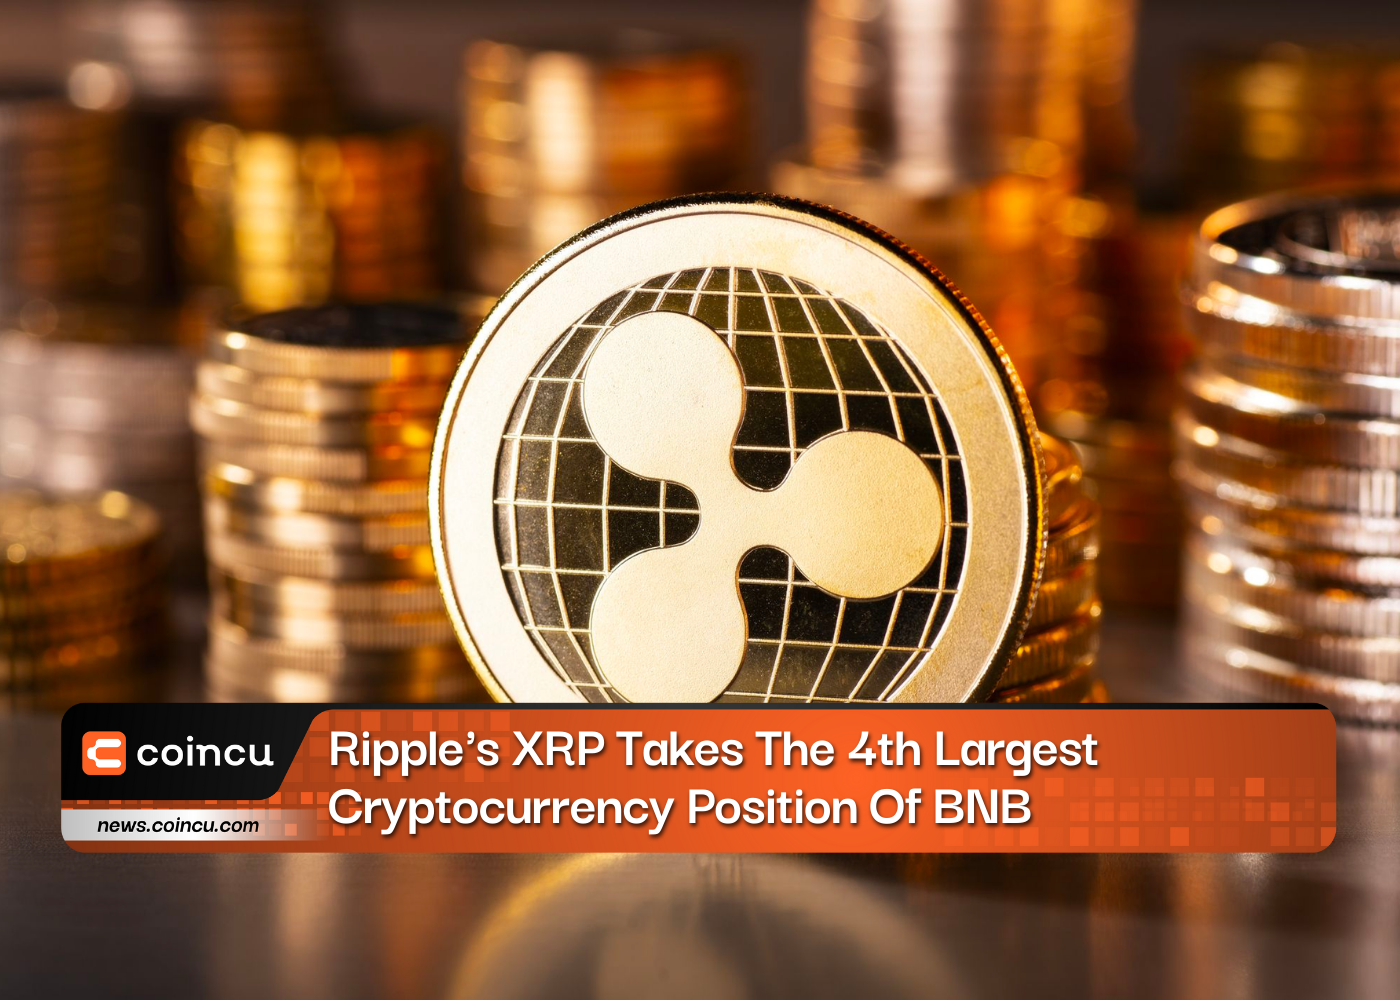 Ripple's XRP Takes The 4th Largest Cryptocurrency Position Of BNB After Over 2 Years